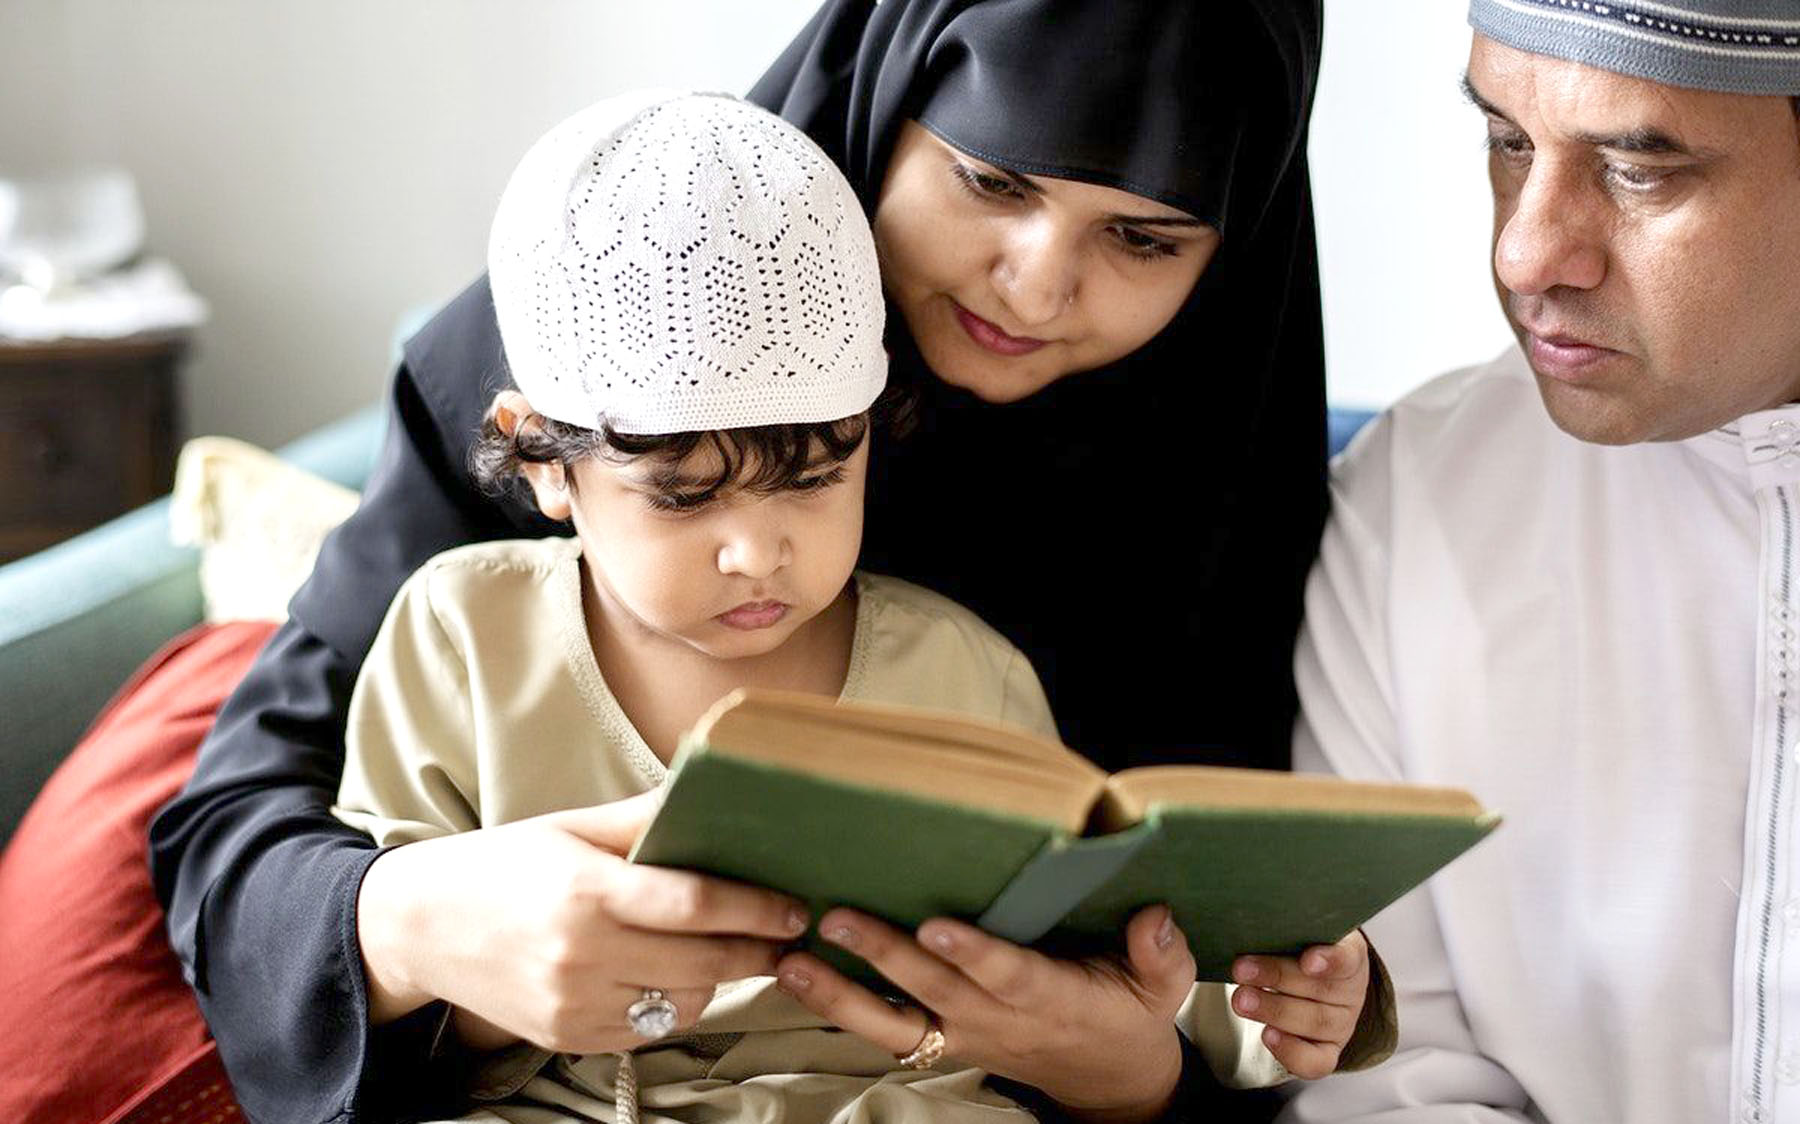 Learn how to explain allah to a child in Islam